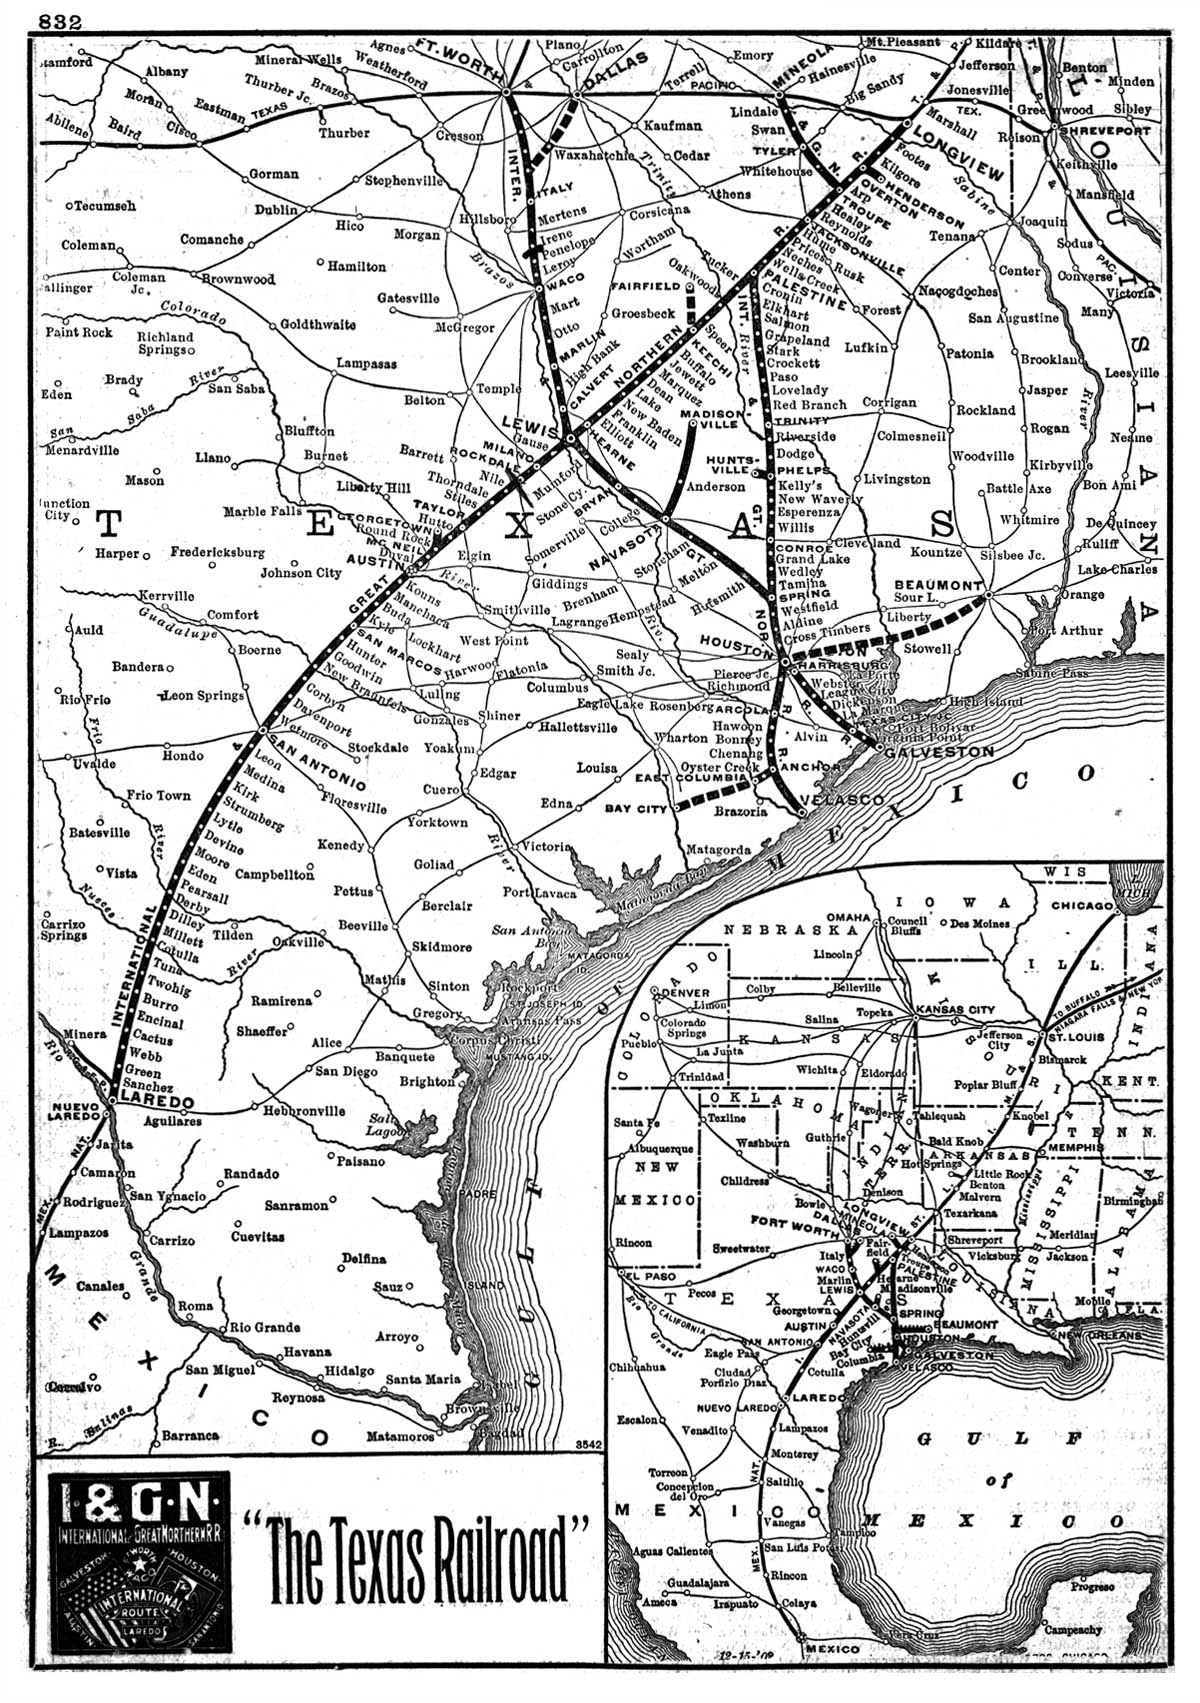 International-Great Northern Railroad Company (Tex.), Map Showing Route in 1906.